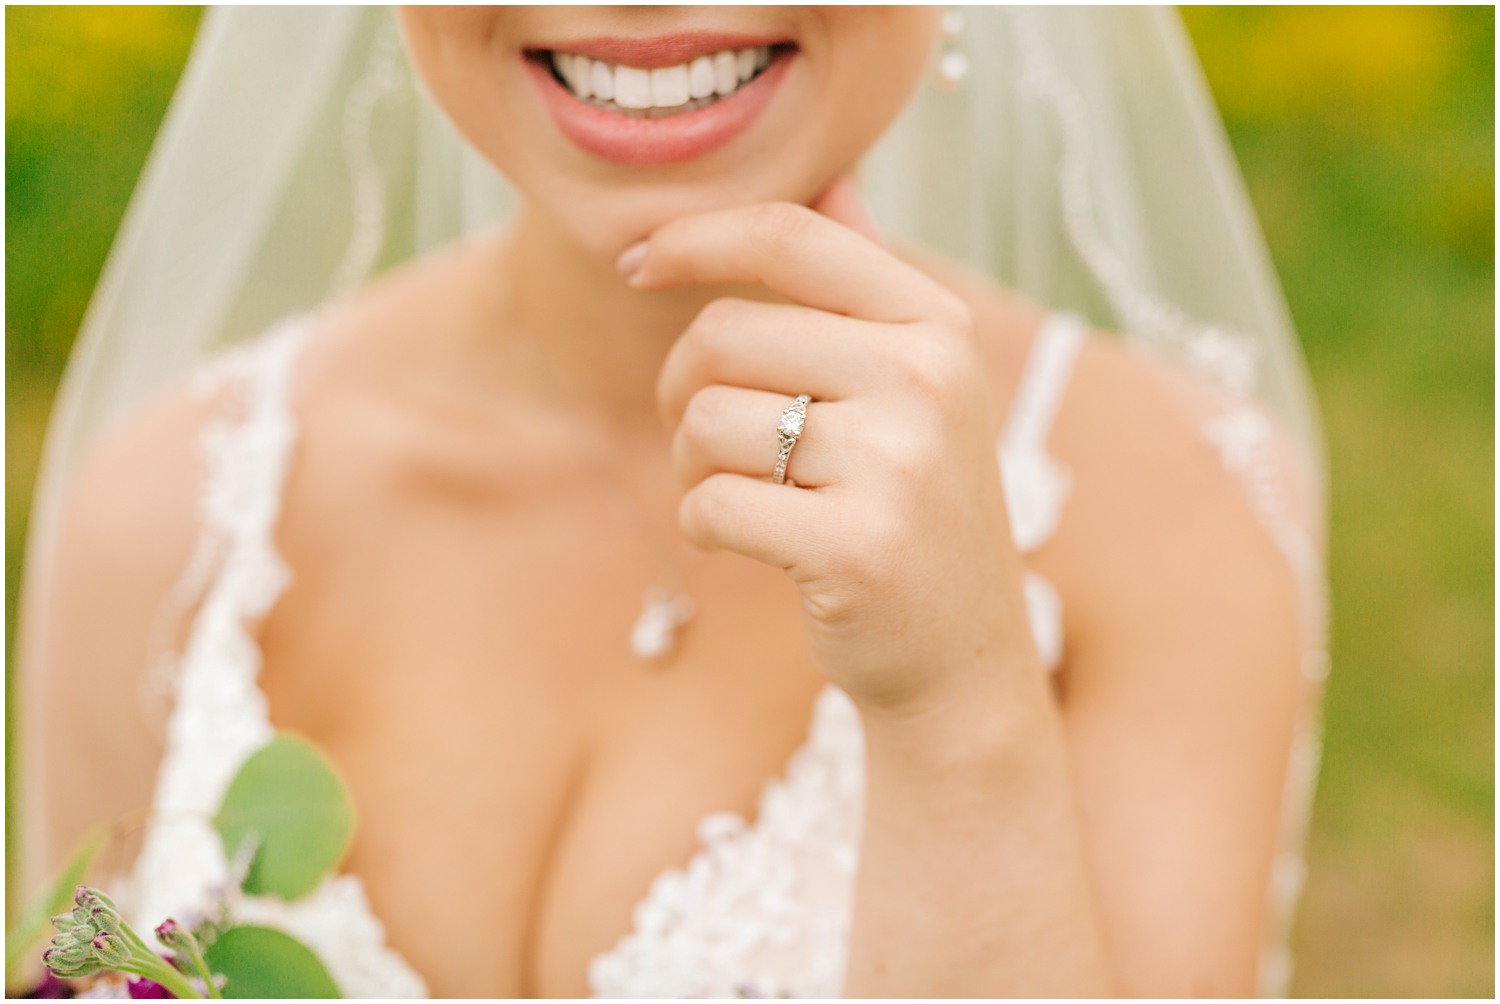 bride shows off wedding ring during bridal session